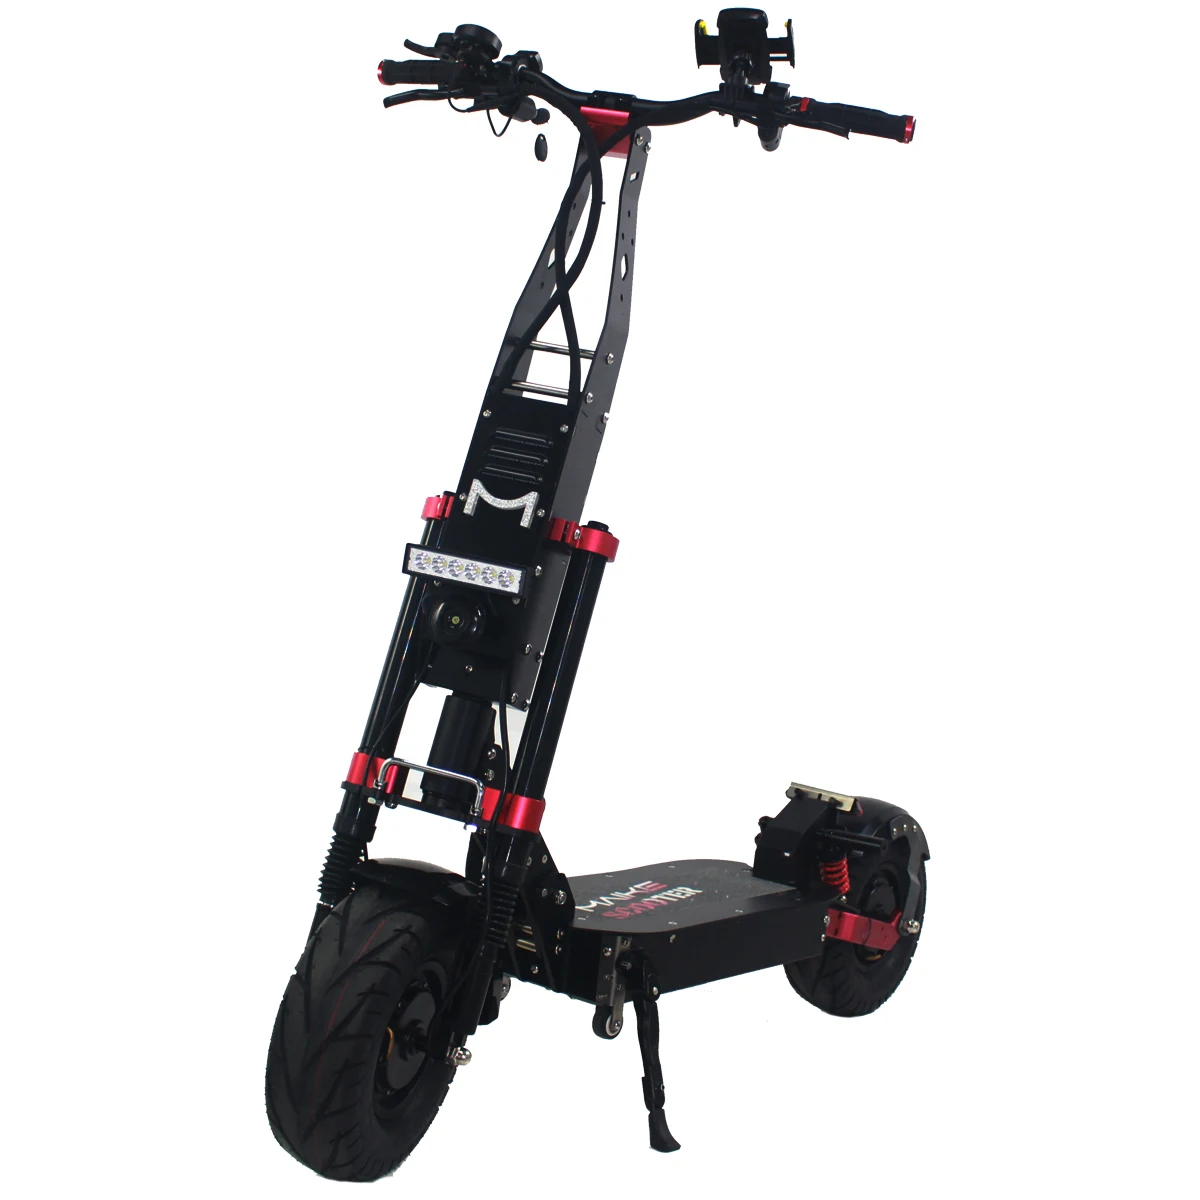 Low Moq maike mk9x e scooter 13 inch fat tire 60v 7200w dual motor powerful off road high speed two wheel electric scooter